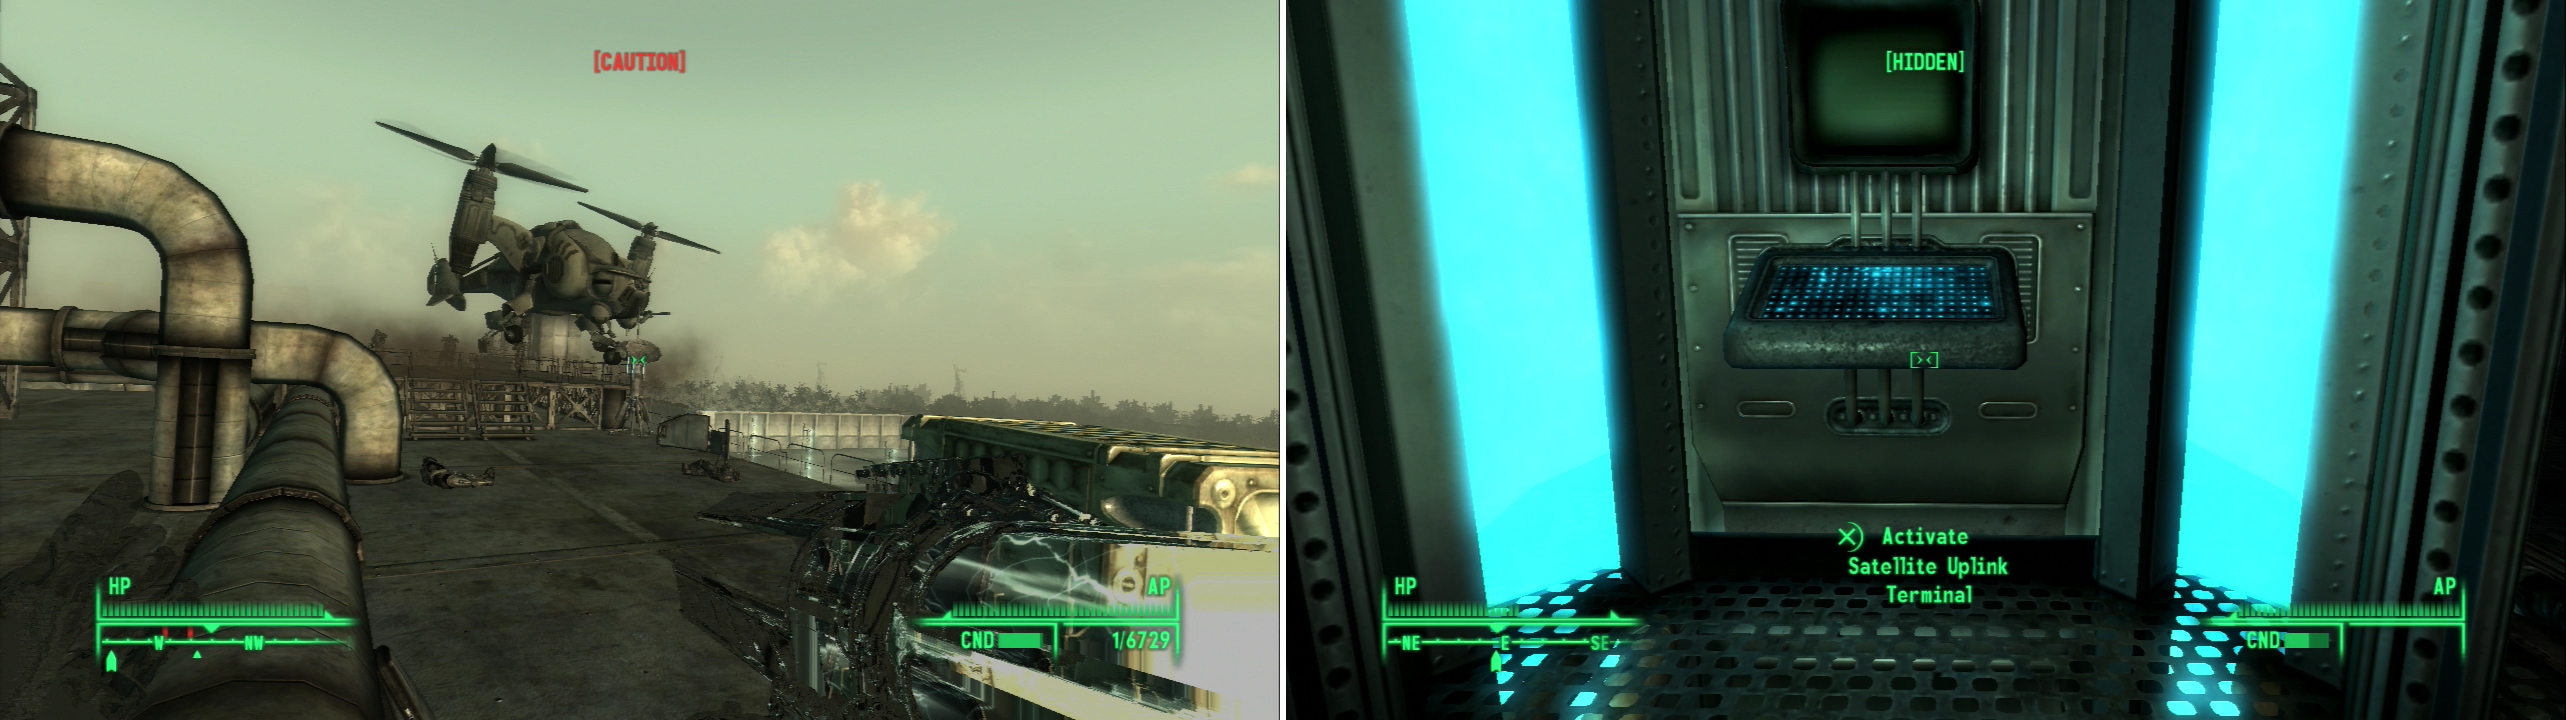 Vertibirds will drop Enclave reinforcements on the roof in a last-ditch effort to stop you (left). Access the Satellite Uplink Terminal and choose your target… (right)